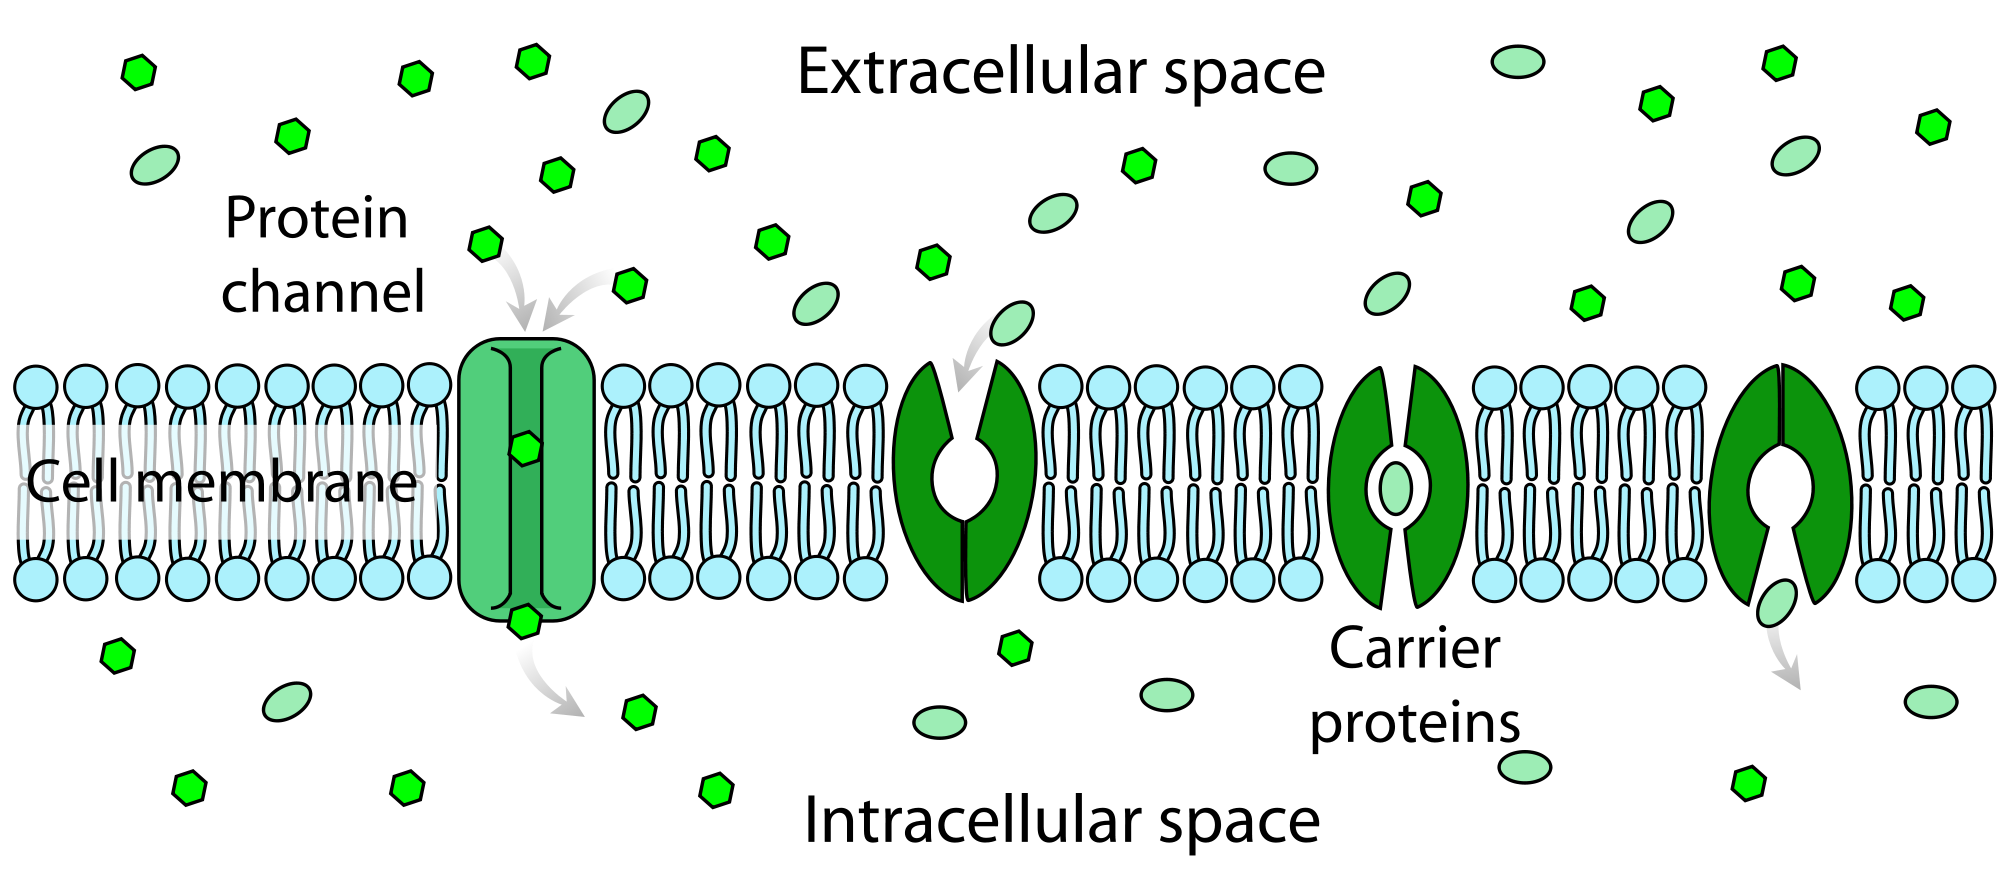 Image shows a diagram of a cell membrane with different types of transport proteins imbedded. There are protein channels which allow small hydrophilic ions or molecules through, and there are carrier proteins which bind with a particular ion of molecule, and then shape in such a way that it moves the ion or molecule across the plasma membrane,